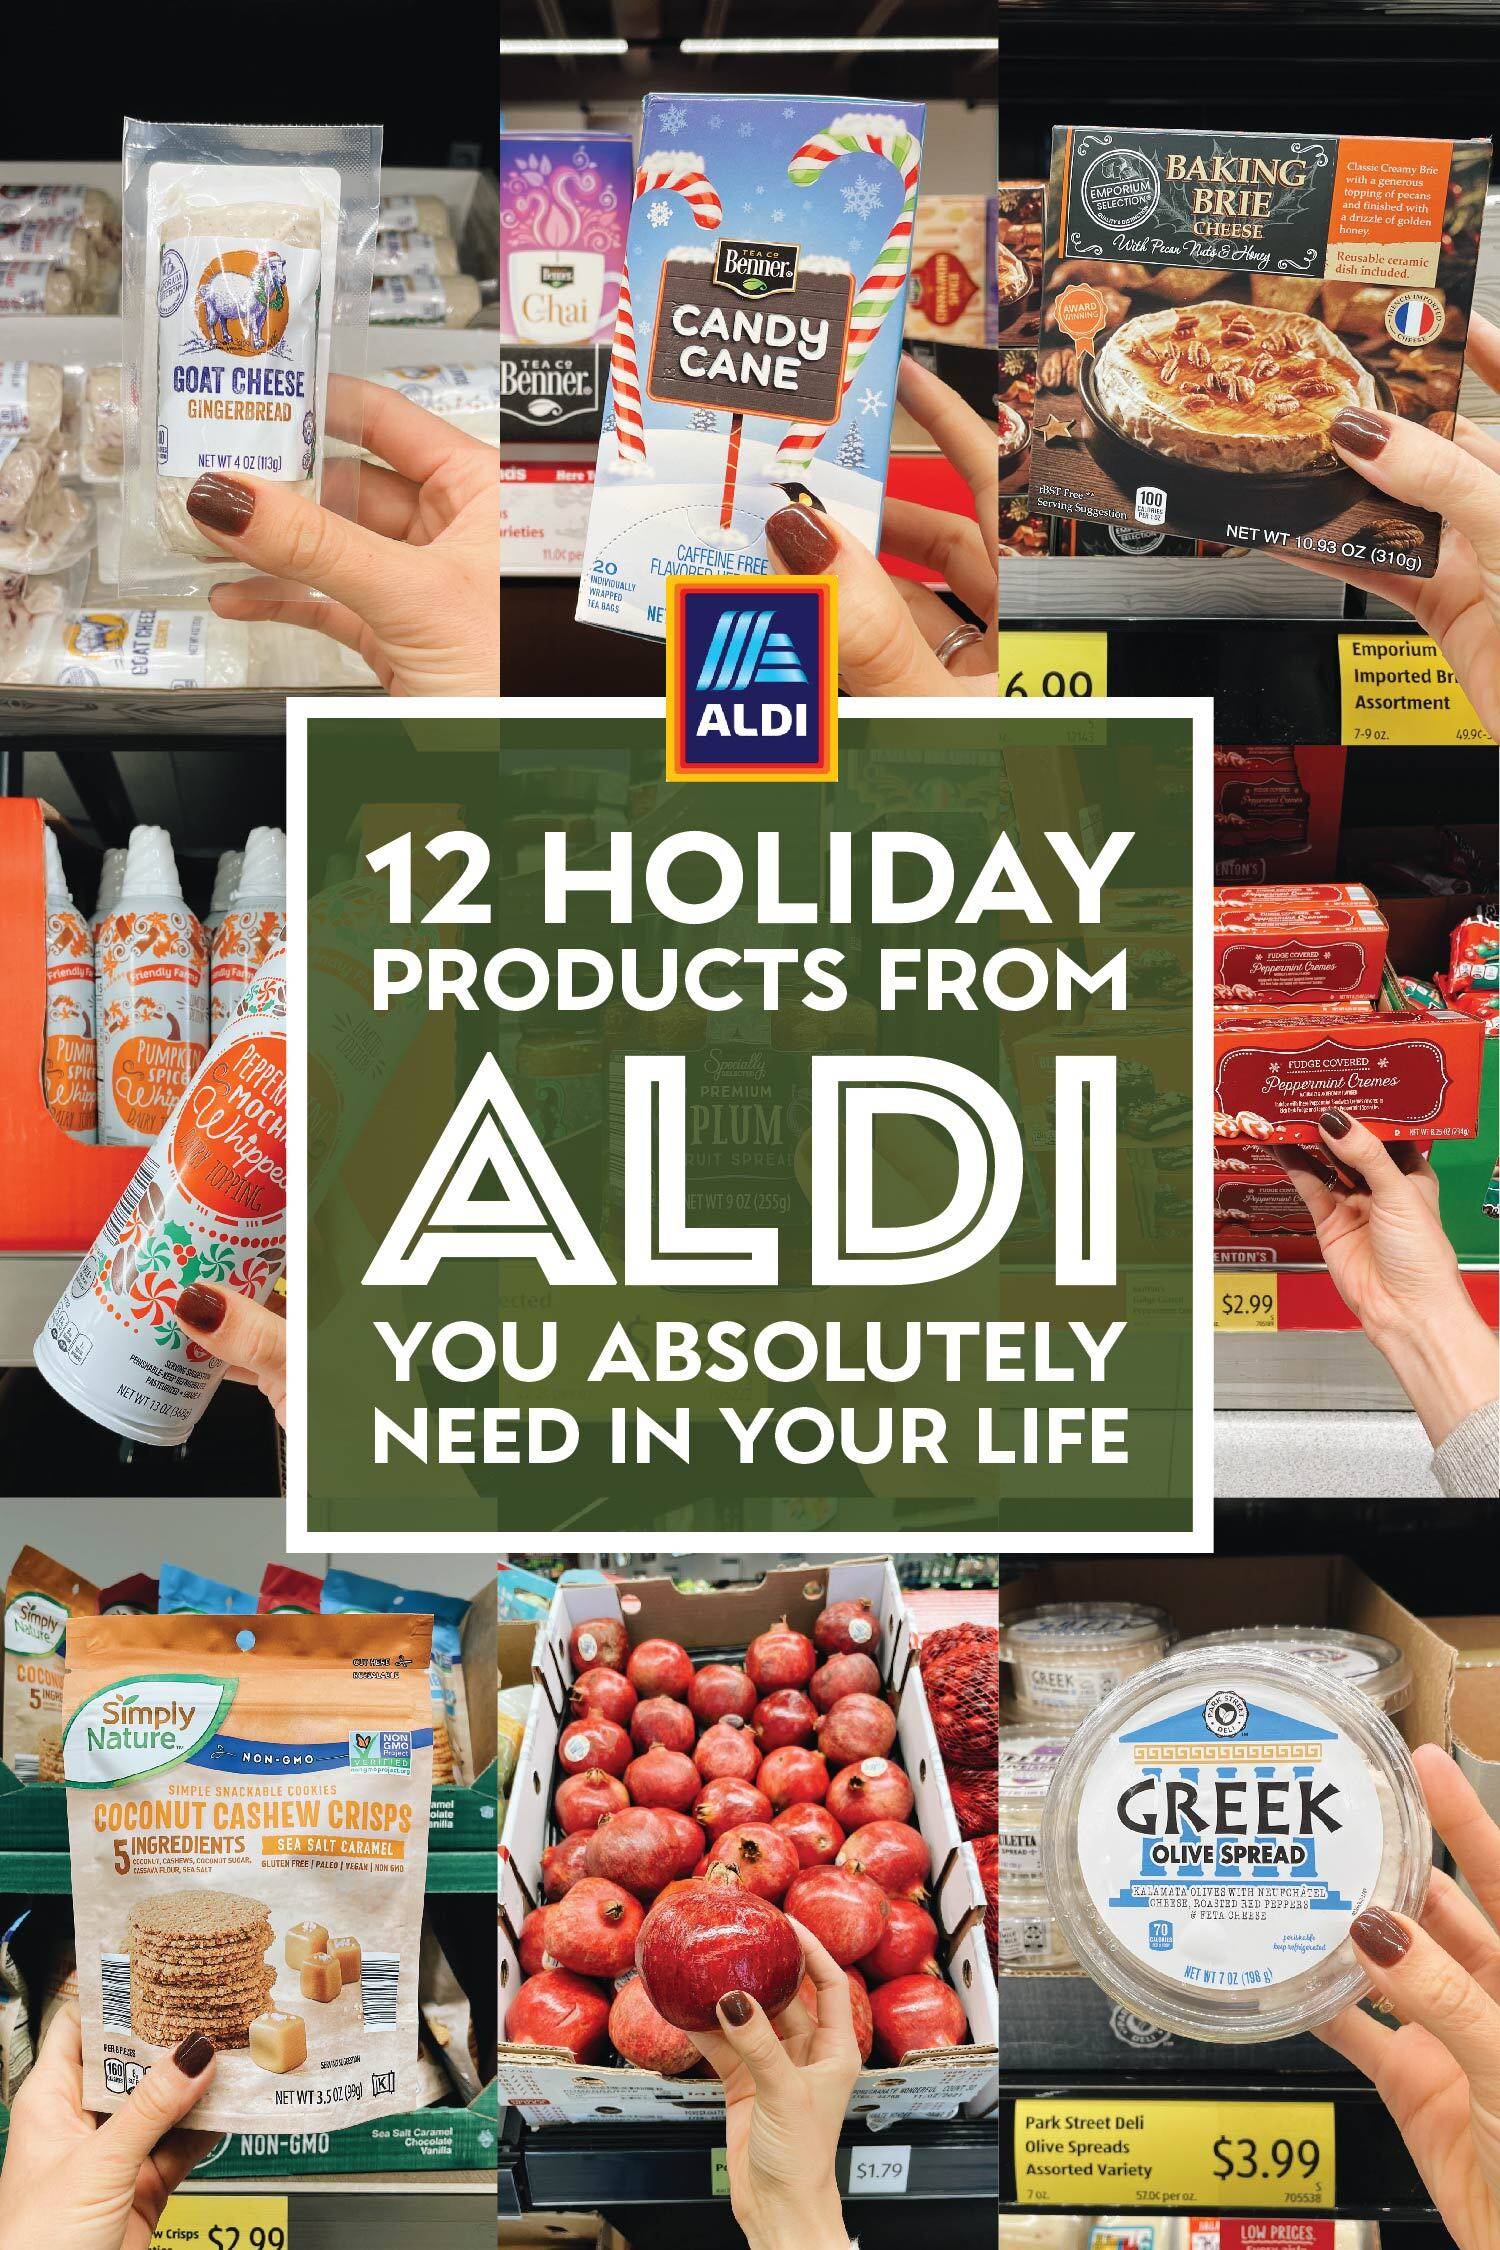 I Tried All of the Holiday Products at ALDI and These Are The 12 Items